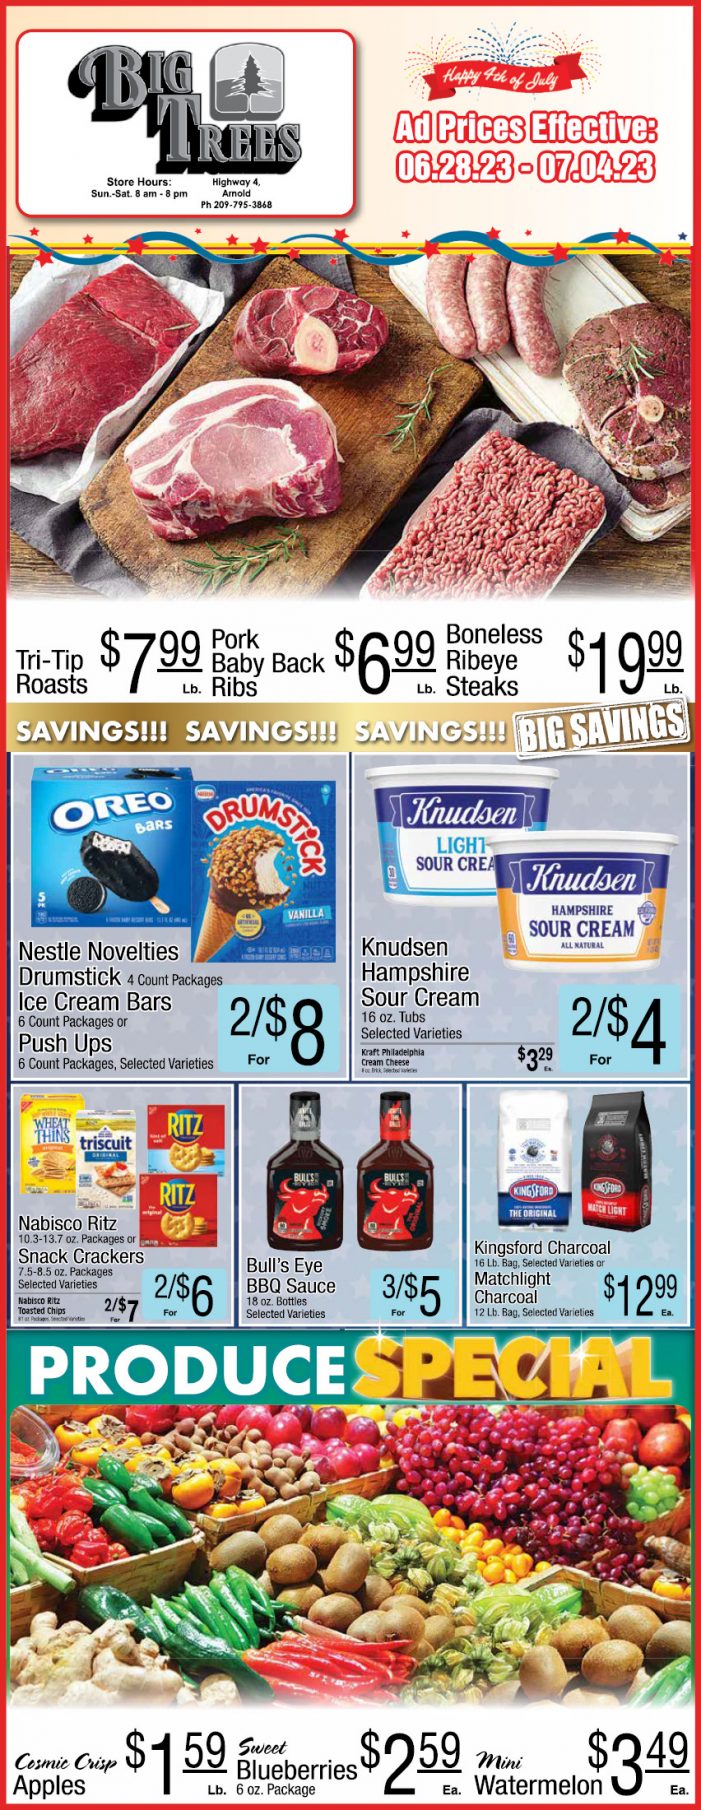 Big Trees Market Weekly Ad, Grocery, Produce, Meat & Deli Specials June 28 ~ July 4th!  Shop Local & Save!